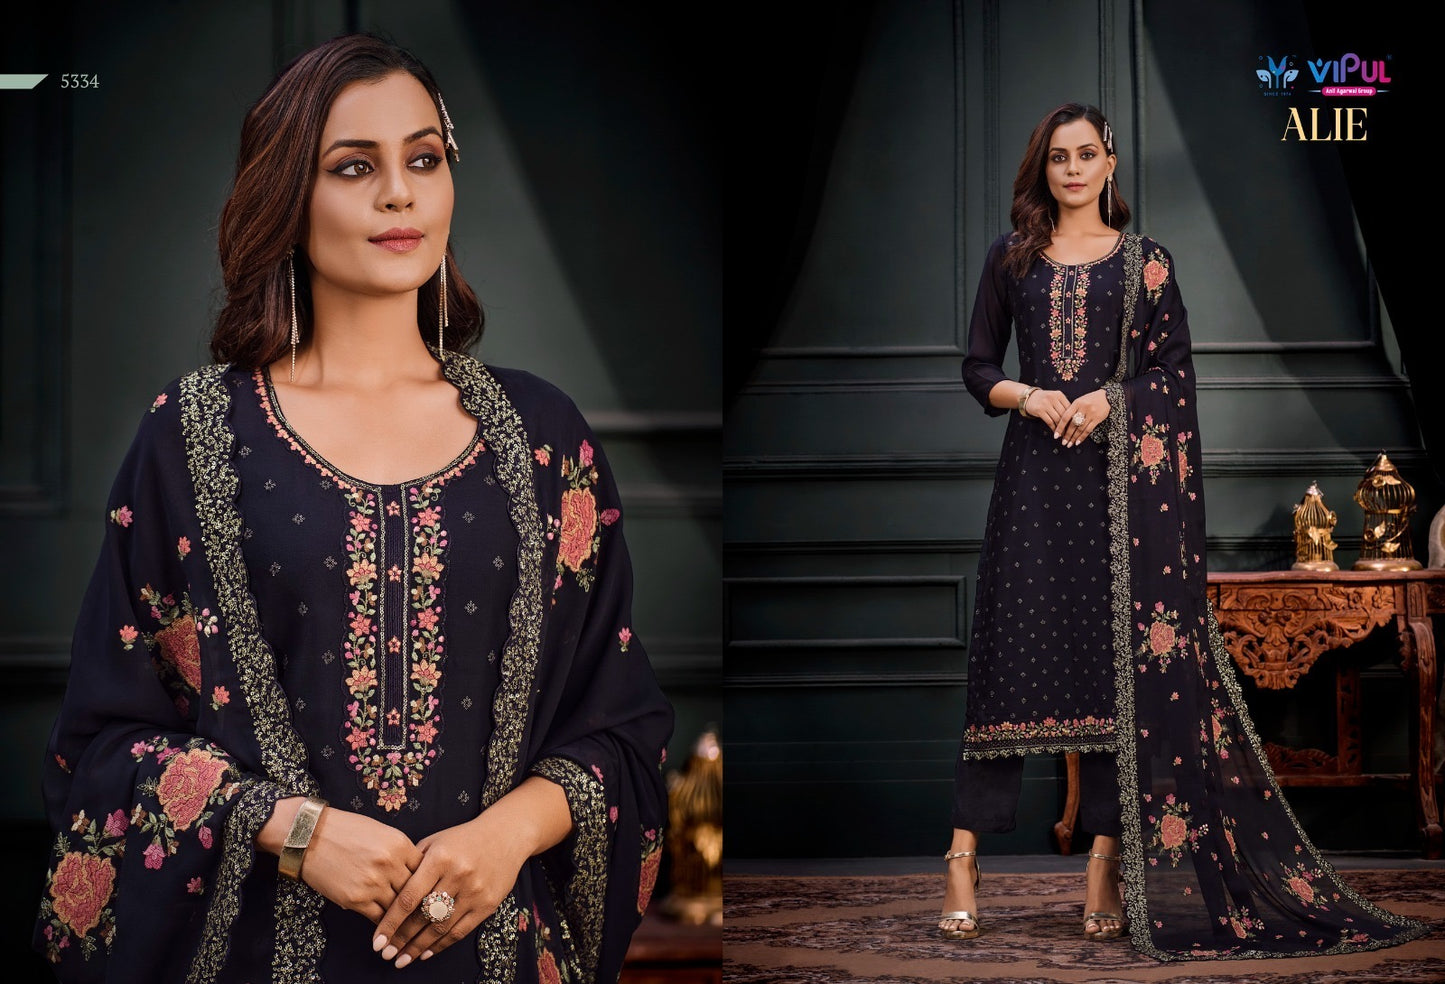 VIPUL Indian Chiffon Georgette Party Dress - Embroidery & Sequin Elegance | Size M - Exclusive Catalogue for Women